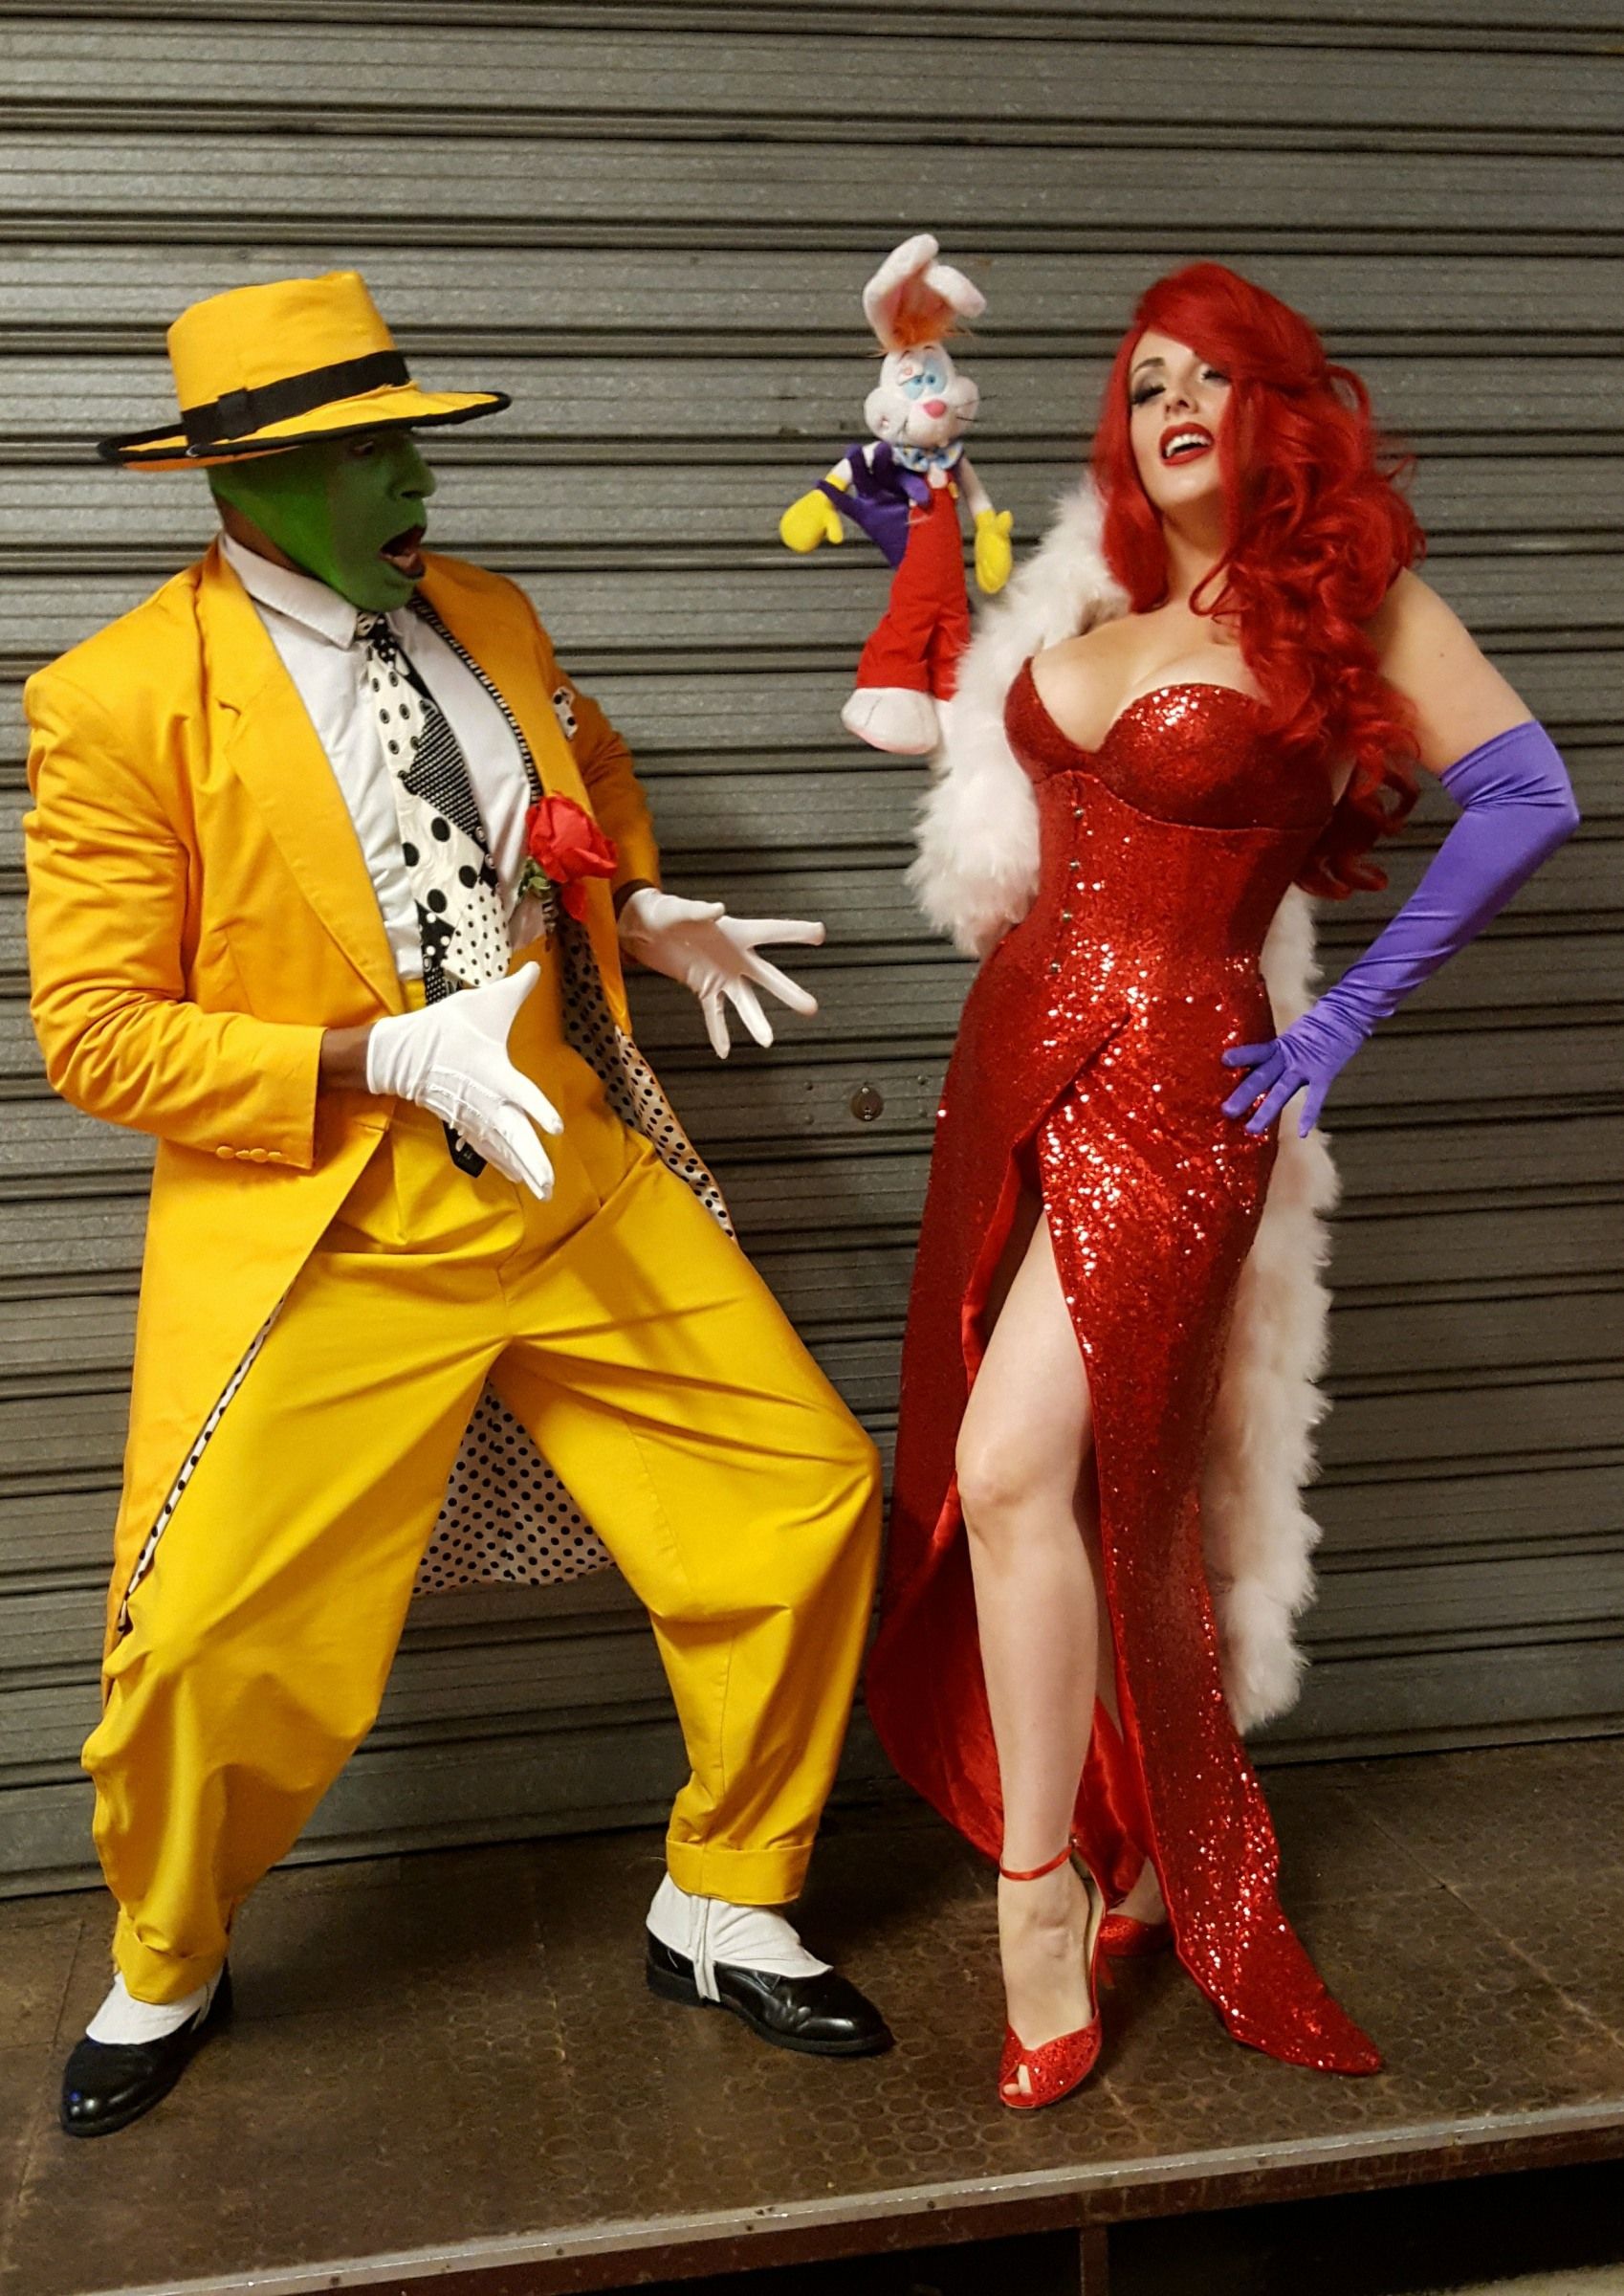 Jessica Rabbit dress up act with roger rabbit toy character and man dressed in yellow cartoon outfit with green face mask